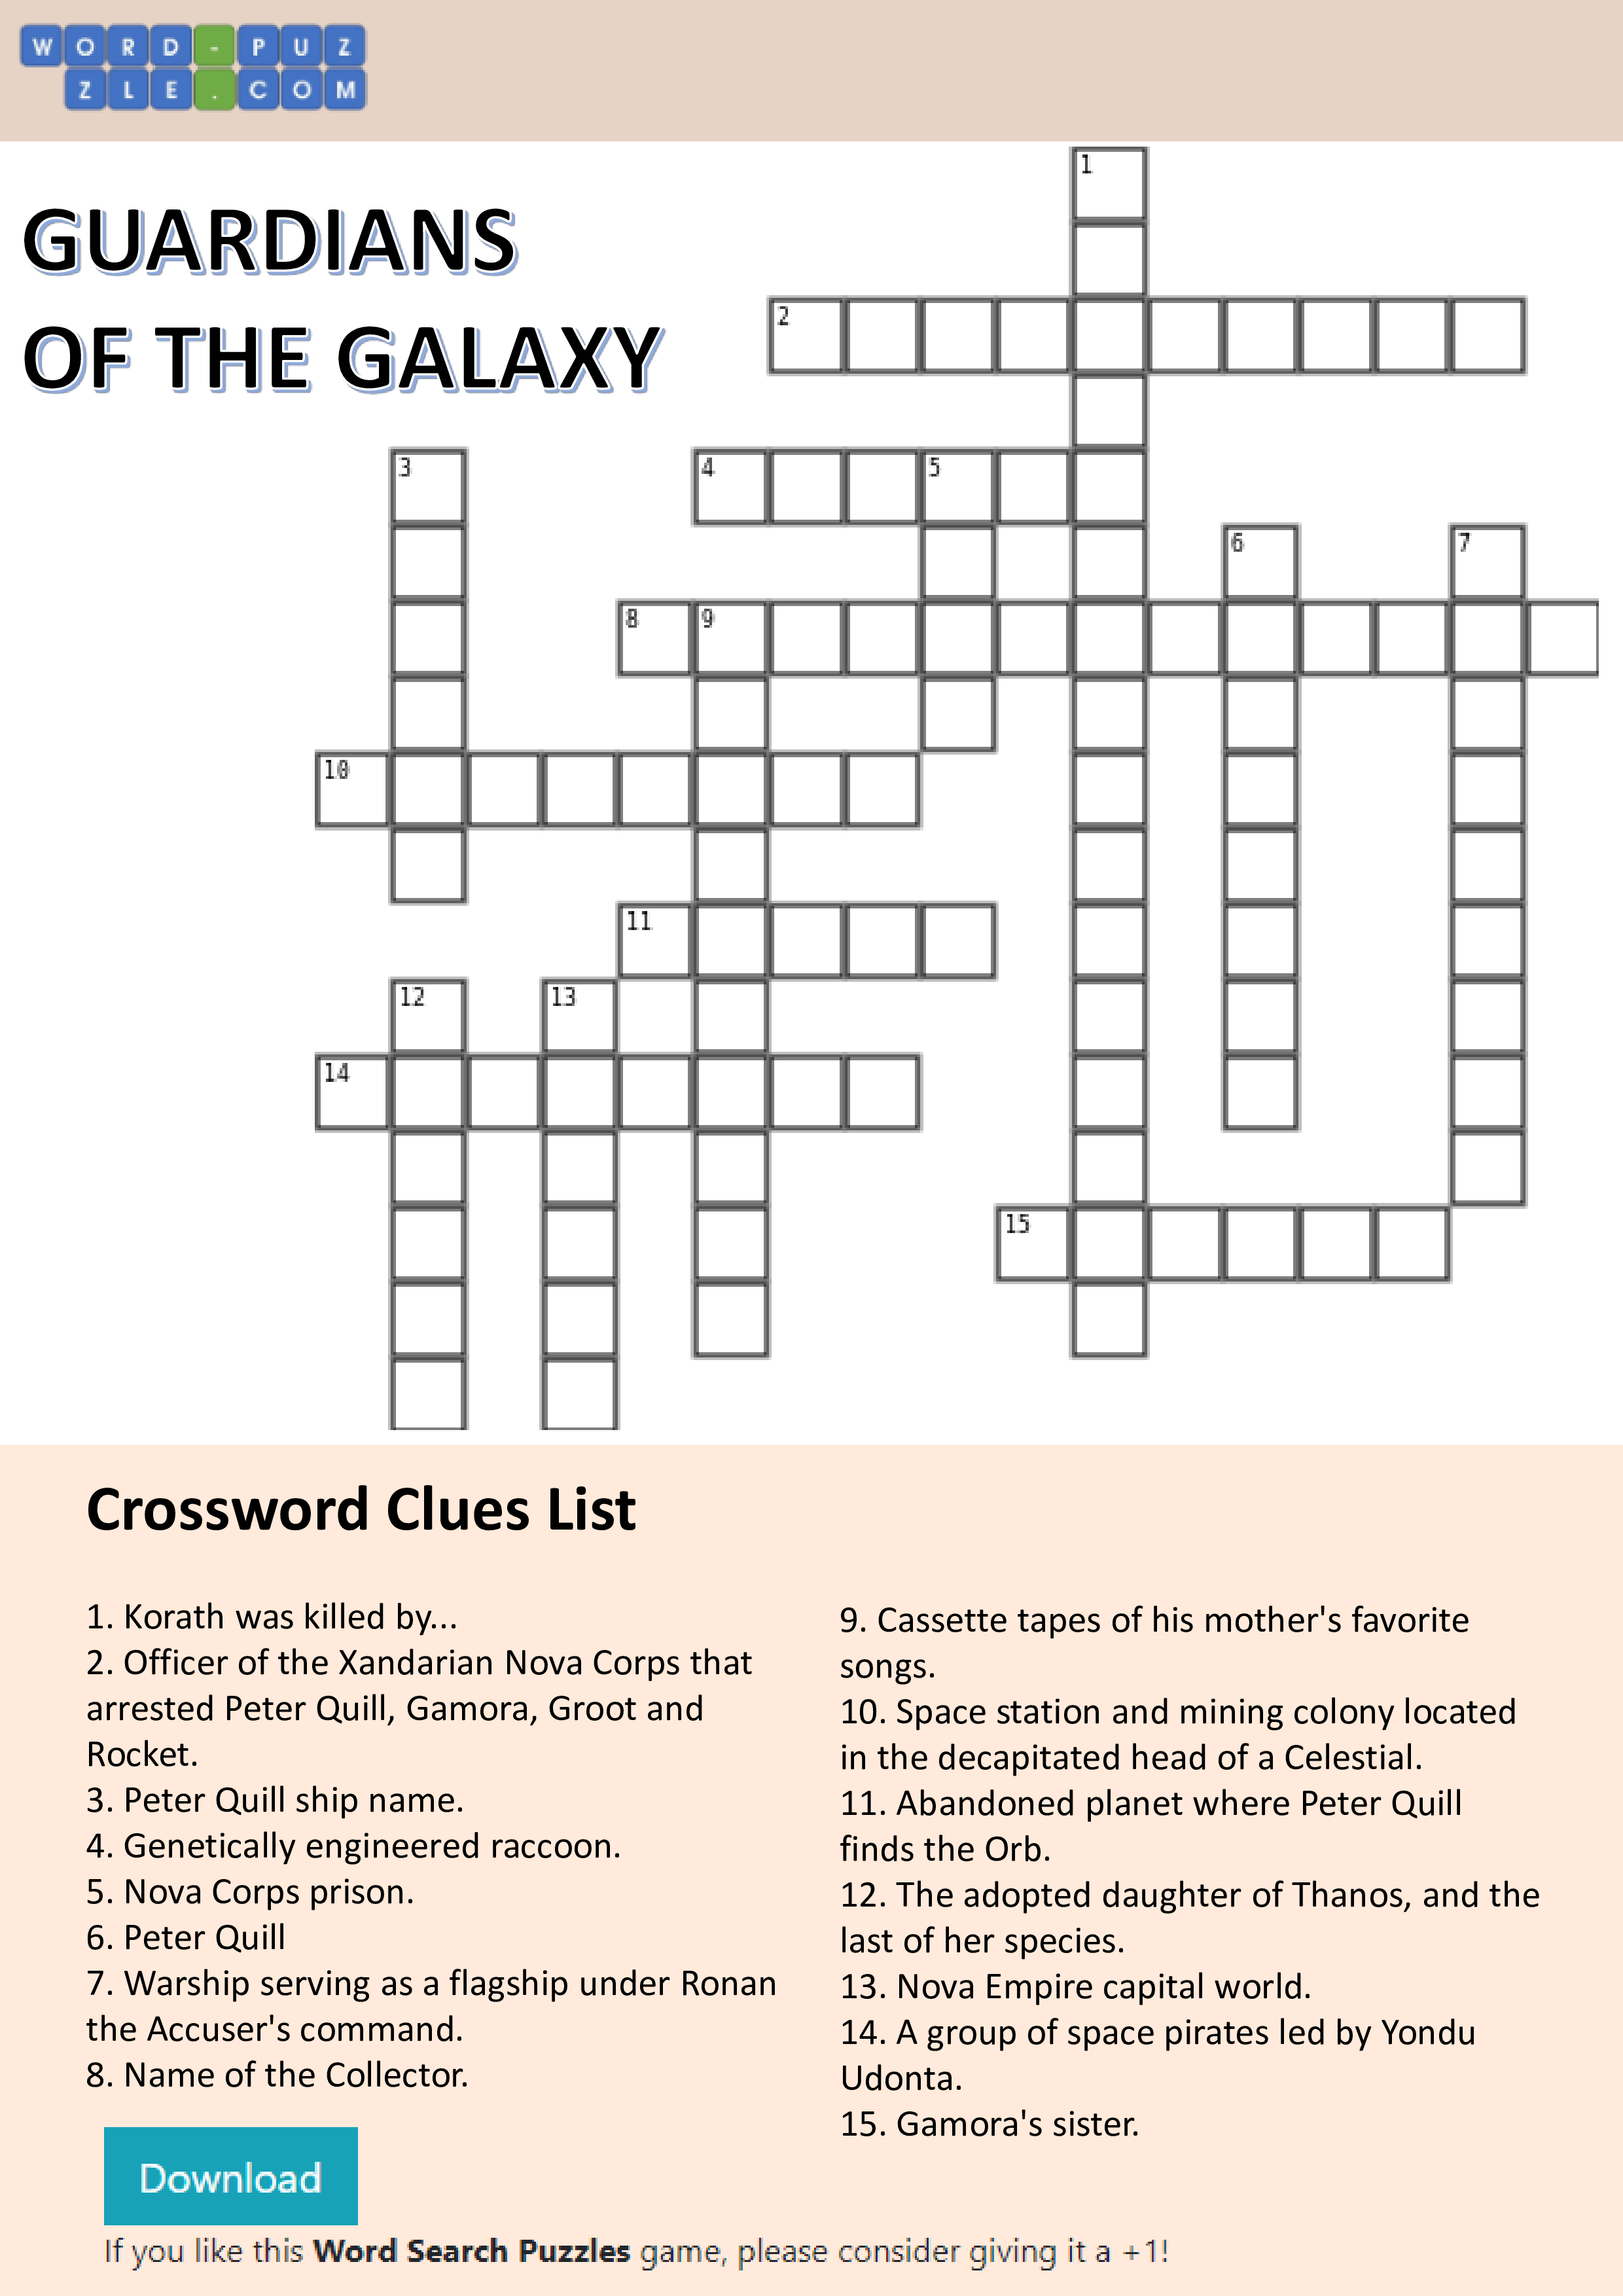 guardians of the galaxy crossword game template